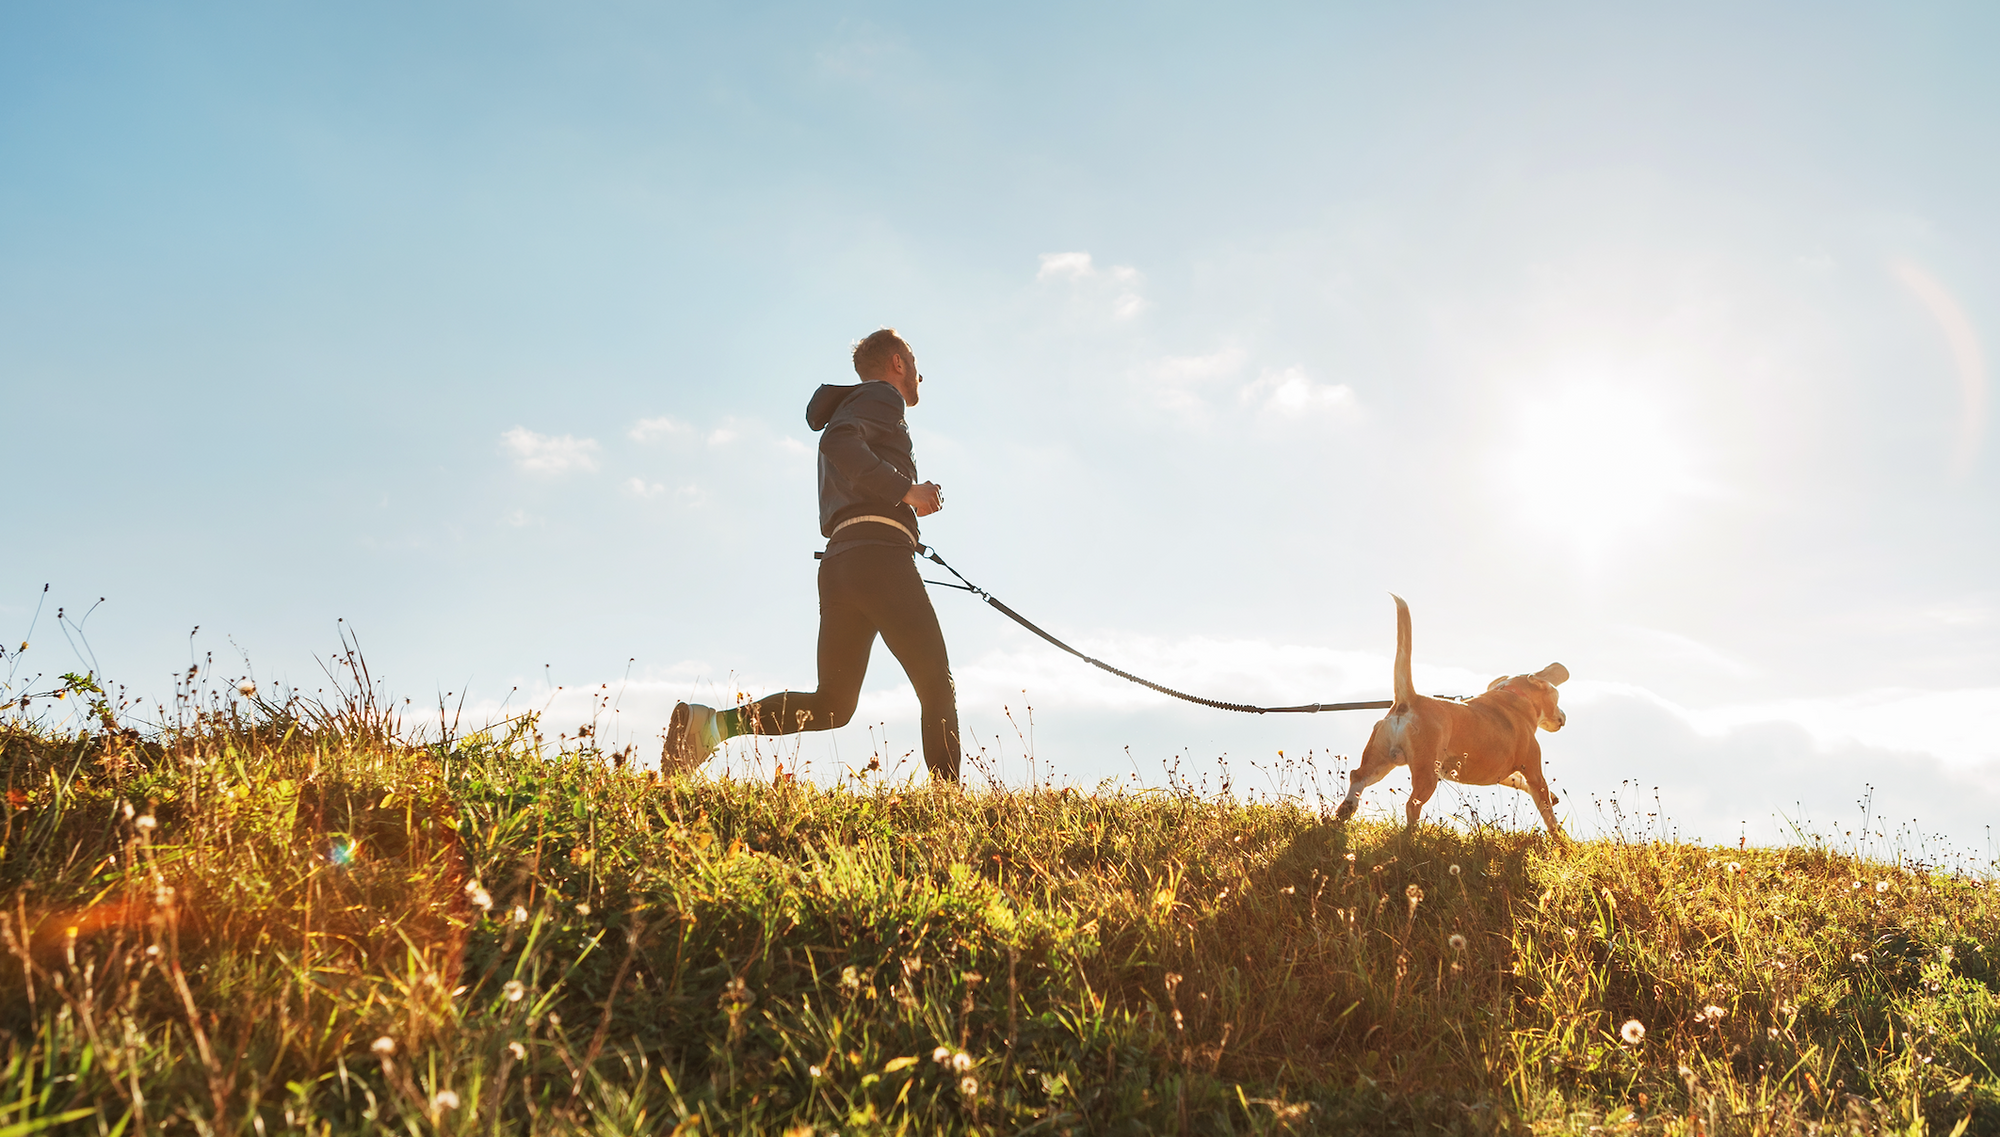 A man running with a dog on a leash in a grassy field.